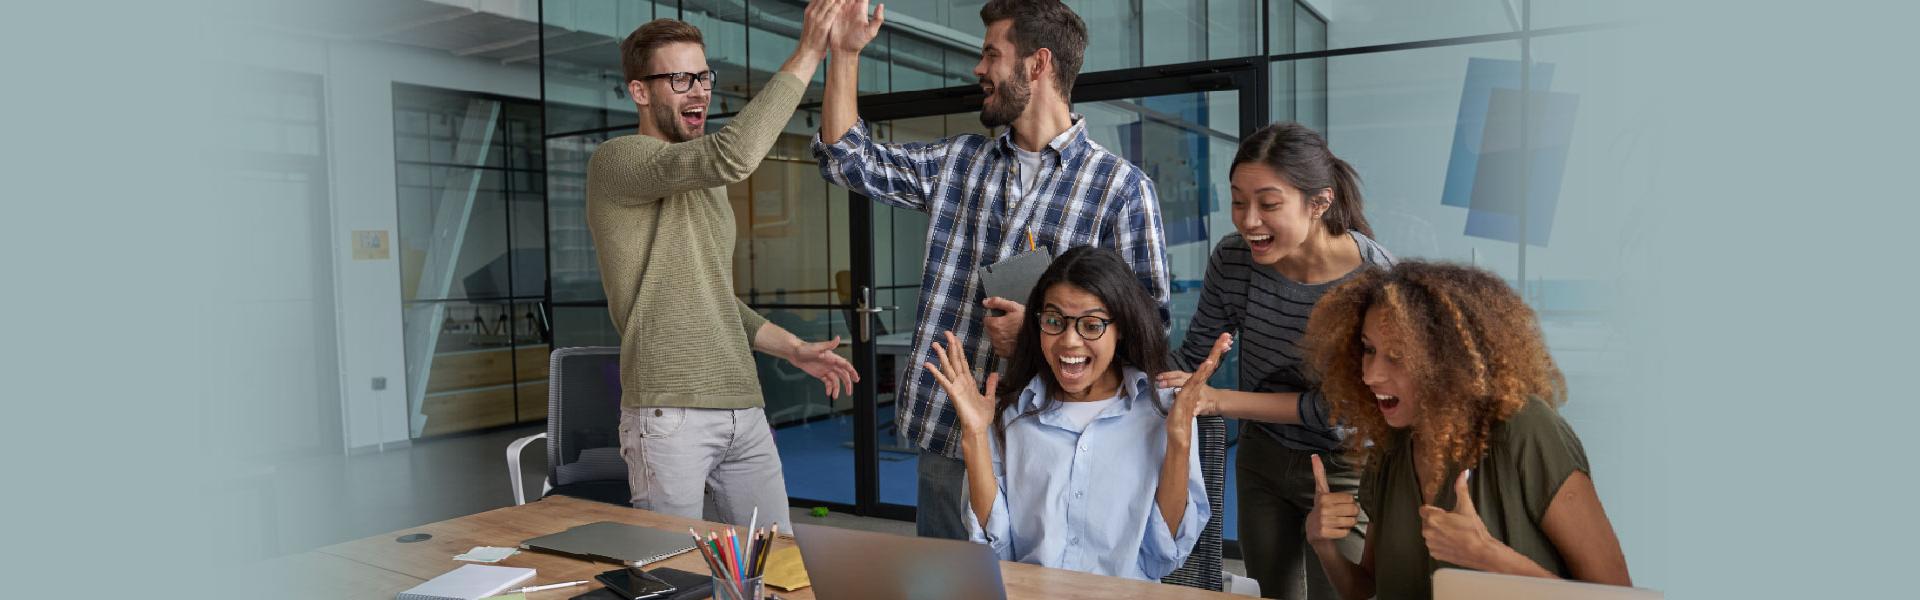 5 Tips to build a remarkable work environment